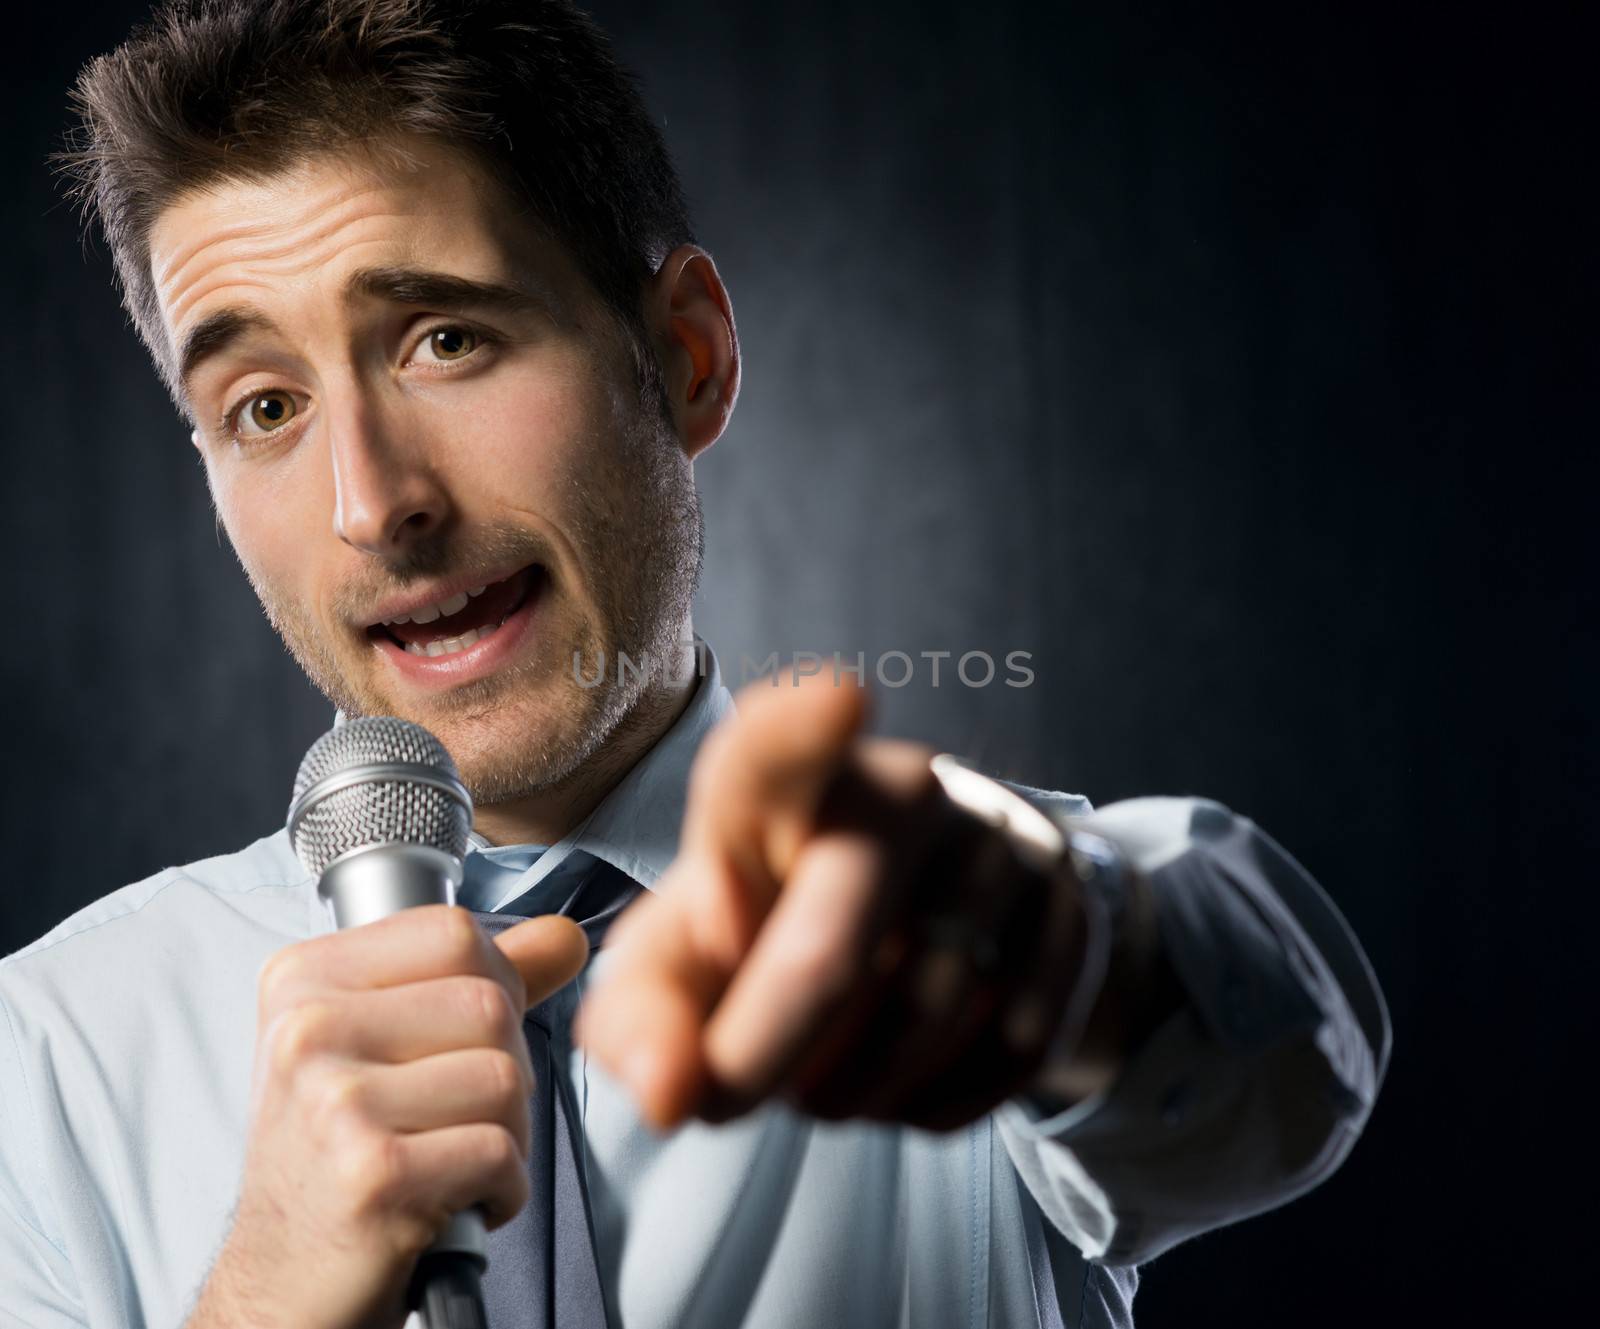 Man giving a speech with microphone and gesturing.